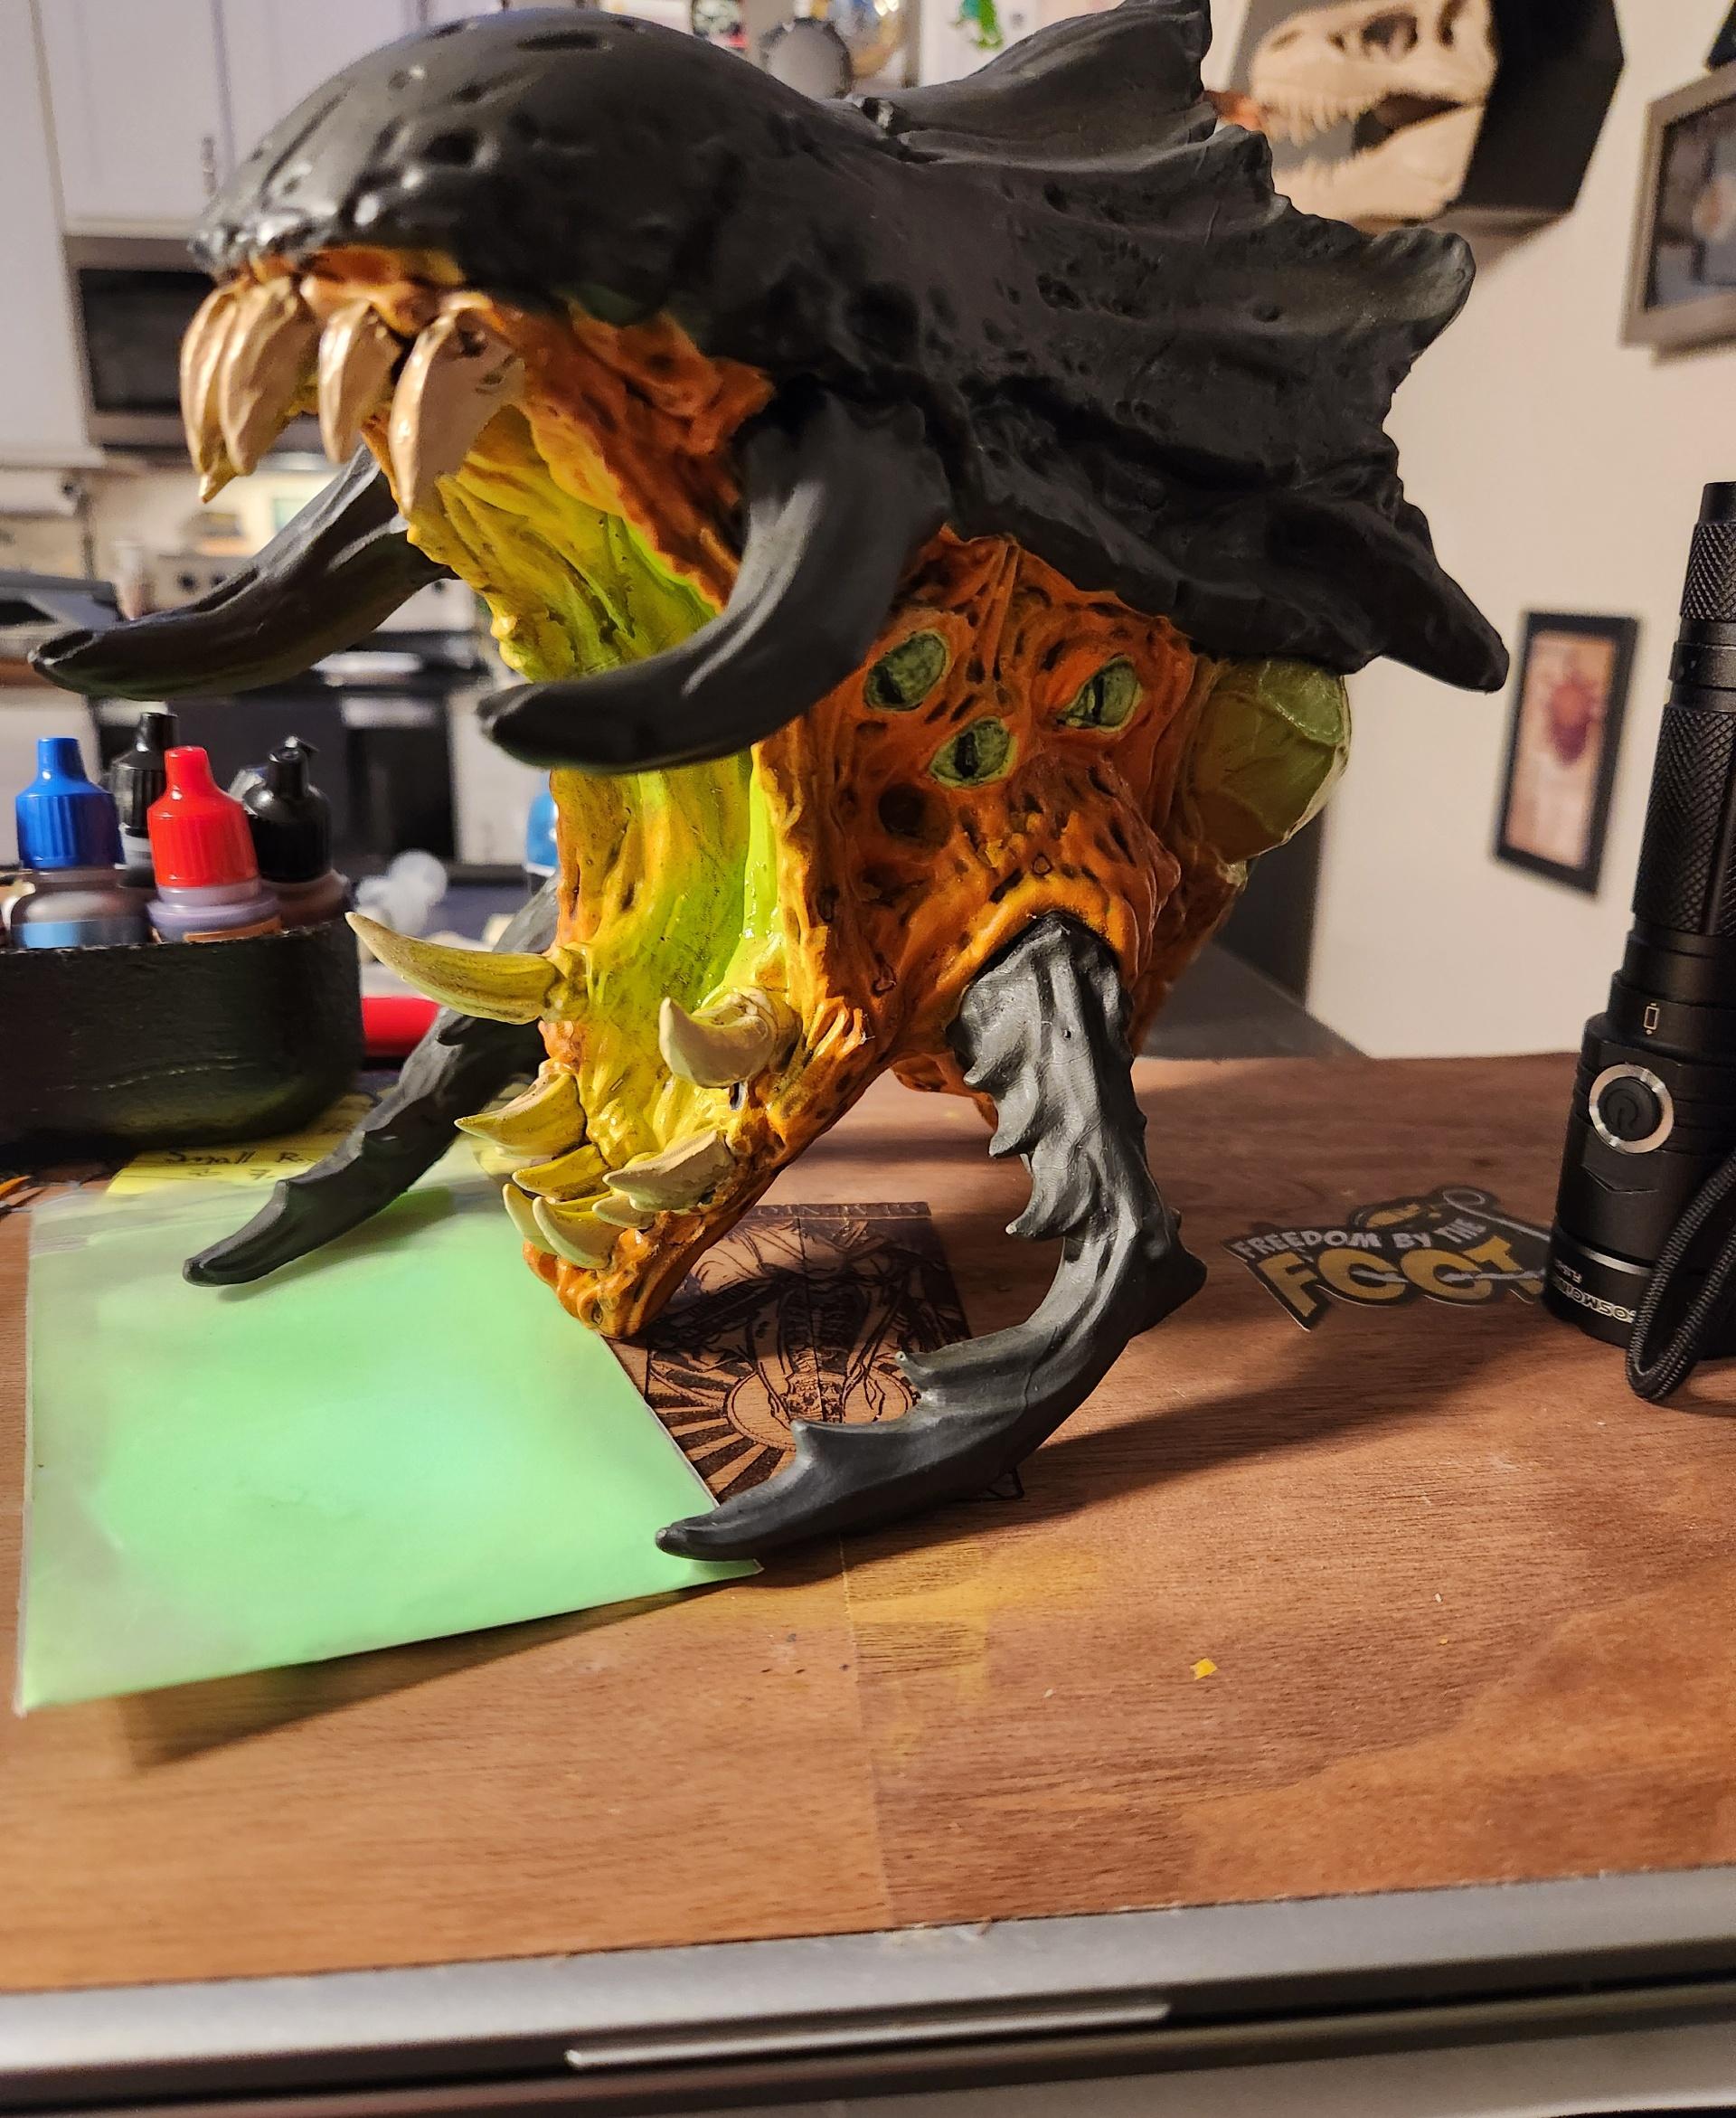 Bile Titan Trophy - Hell Divers 2 - Fan Art - Still a wip. But im very excited how it's turning out!! I would happily pay for more trophy heads from helldivers or other games!! I just wish I could print it bigger - 3d model